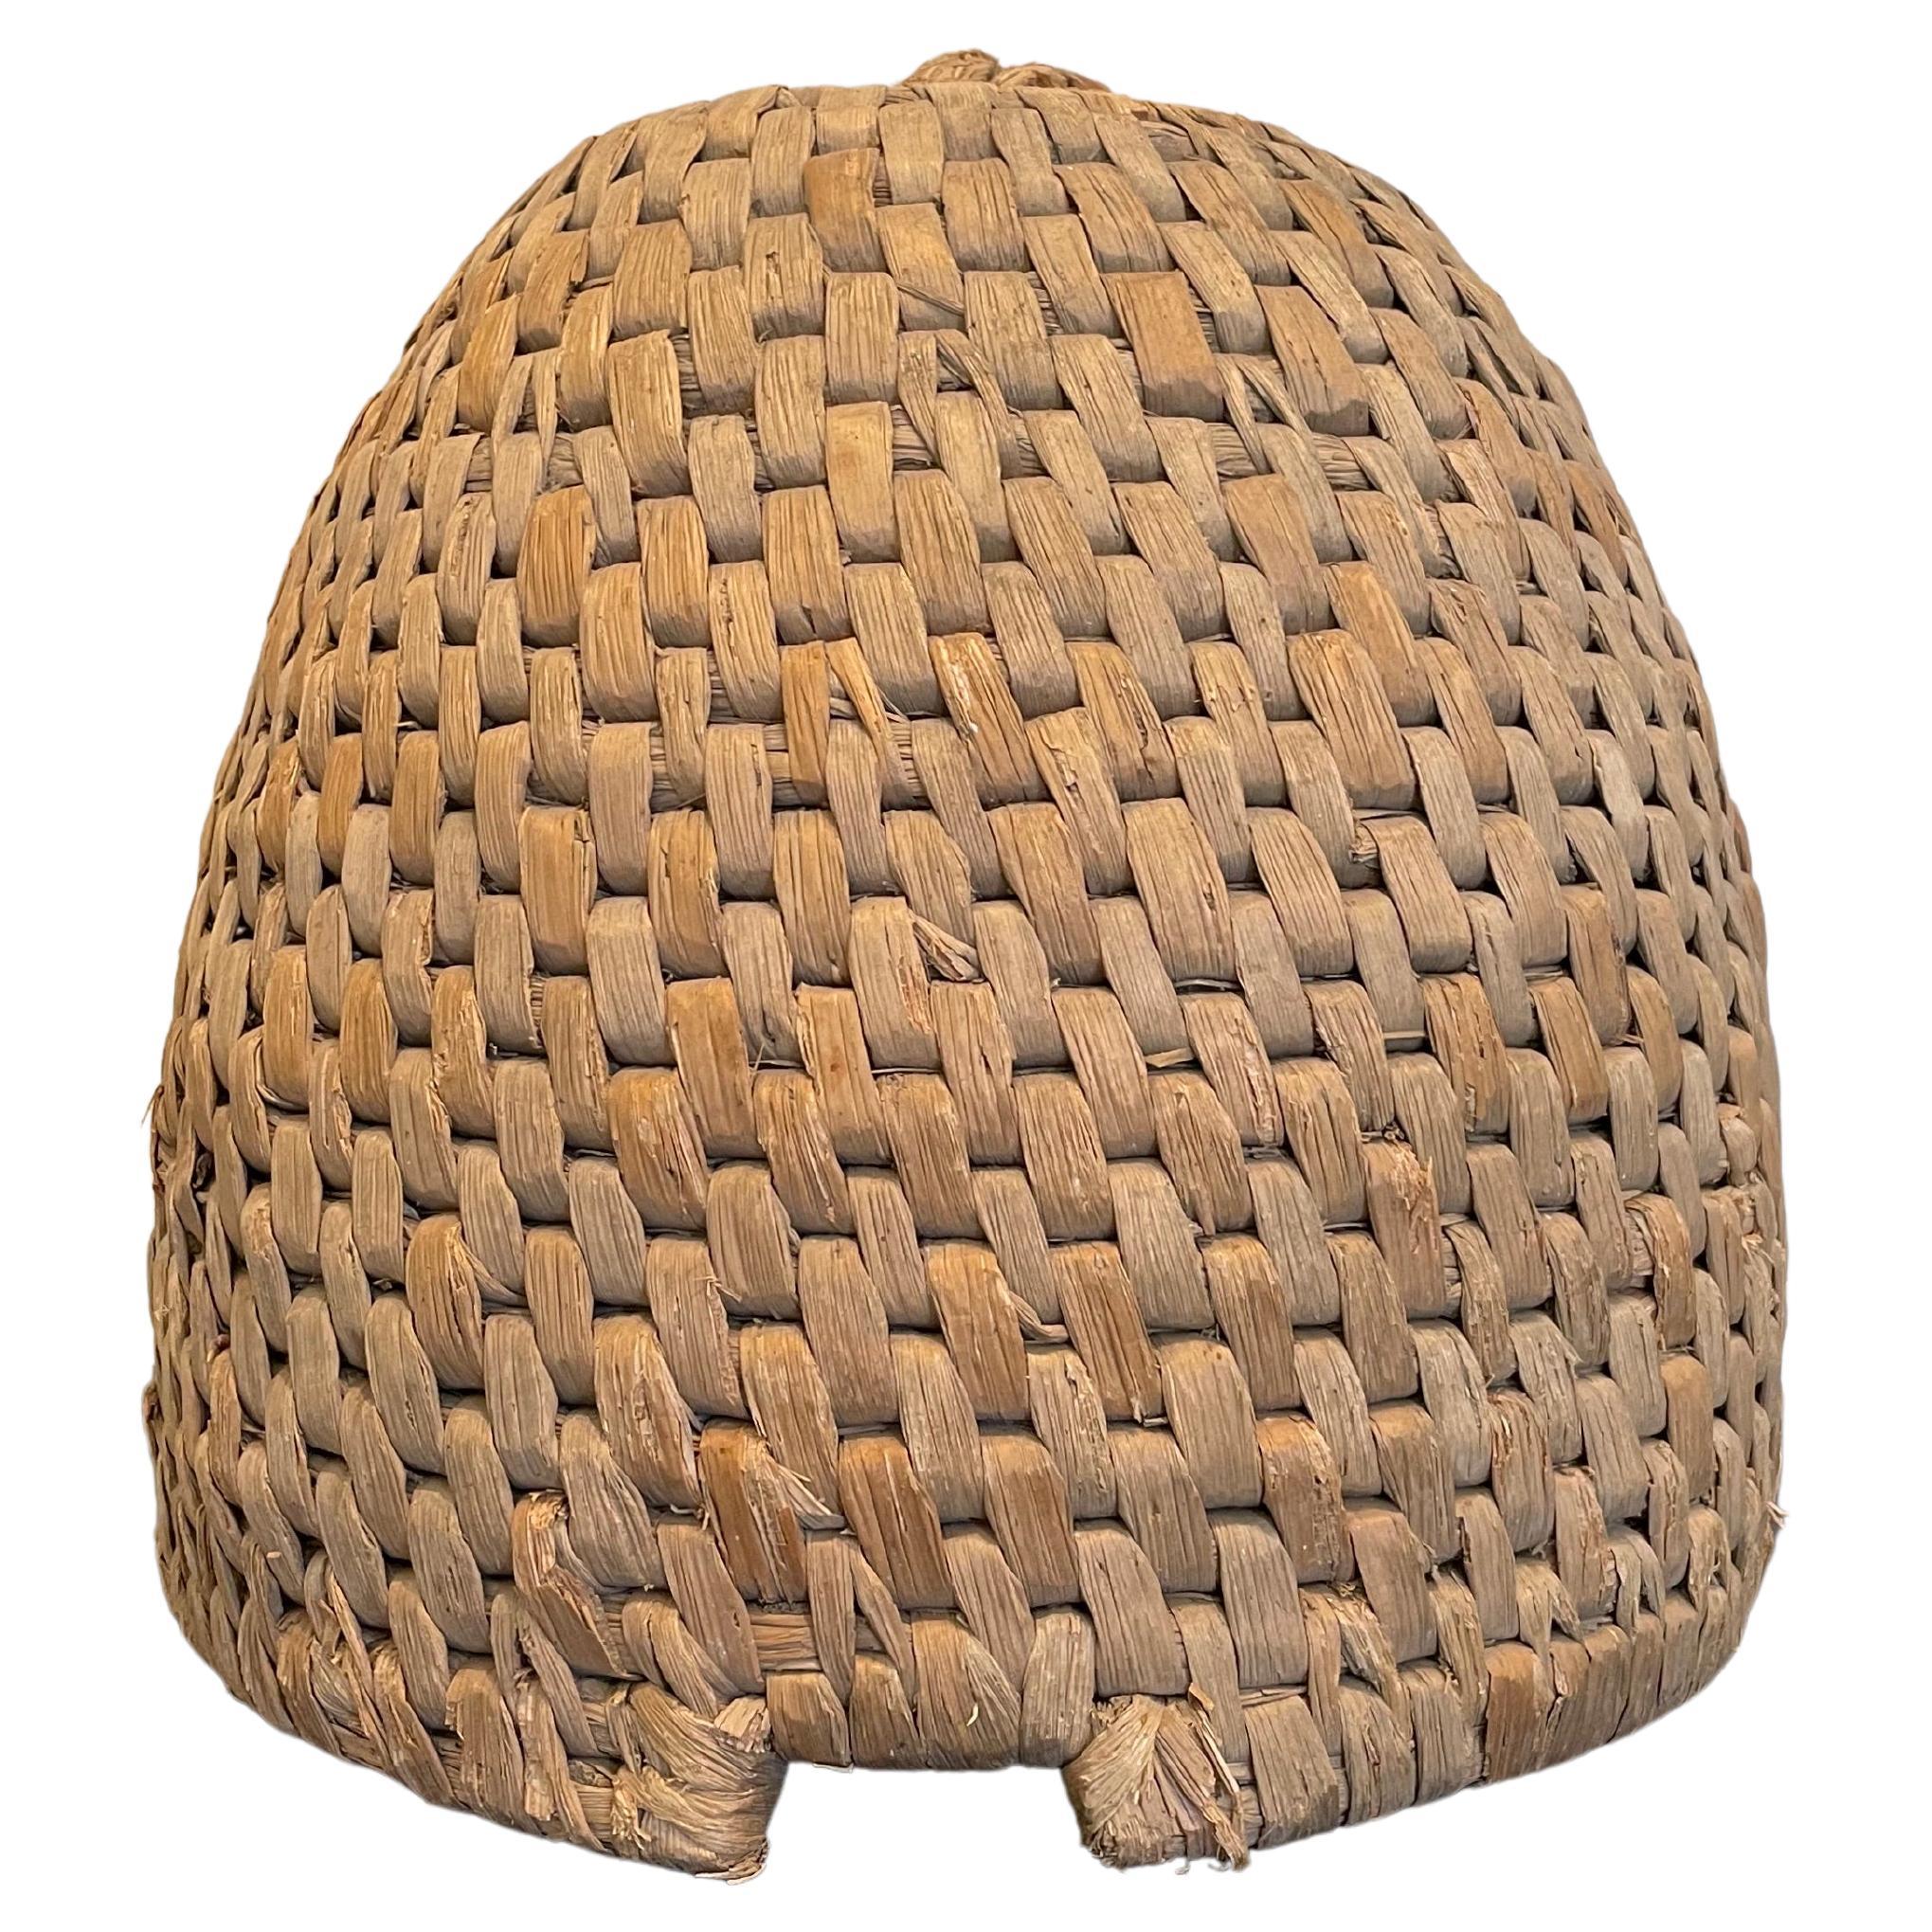 A bee skep is a traditional round hive made of straw or dried grass. Multiple strands of straw are bundled together to form a thick rope and the rope is then coiled and bound together to make the skep.

The word skep is thought to have come from